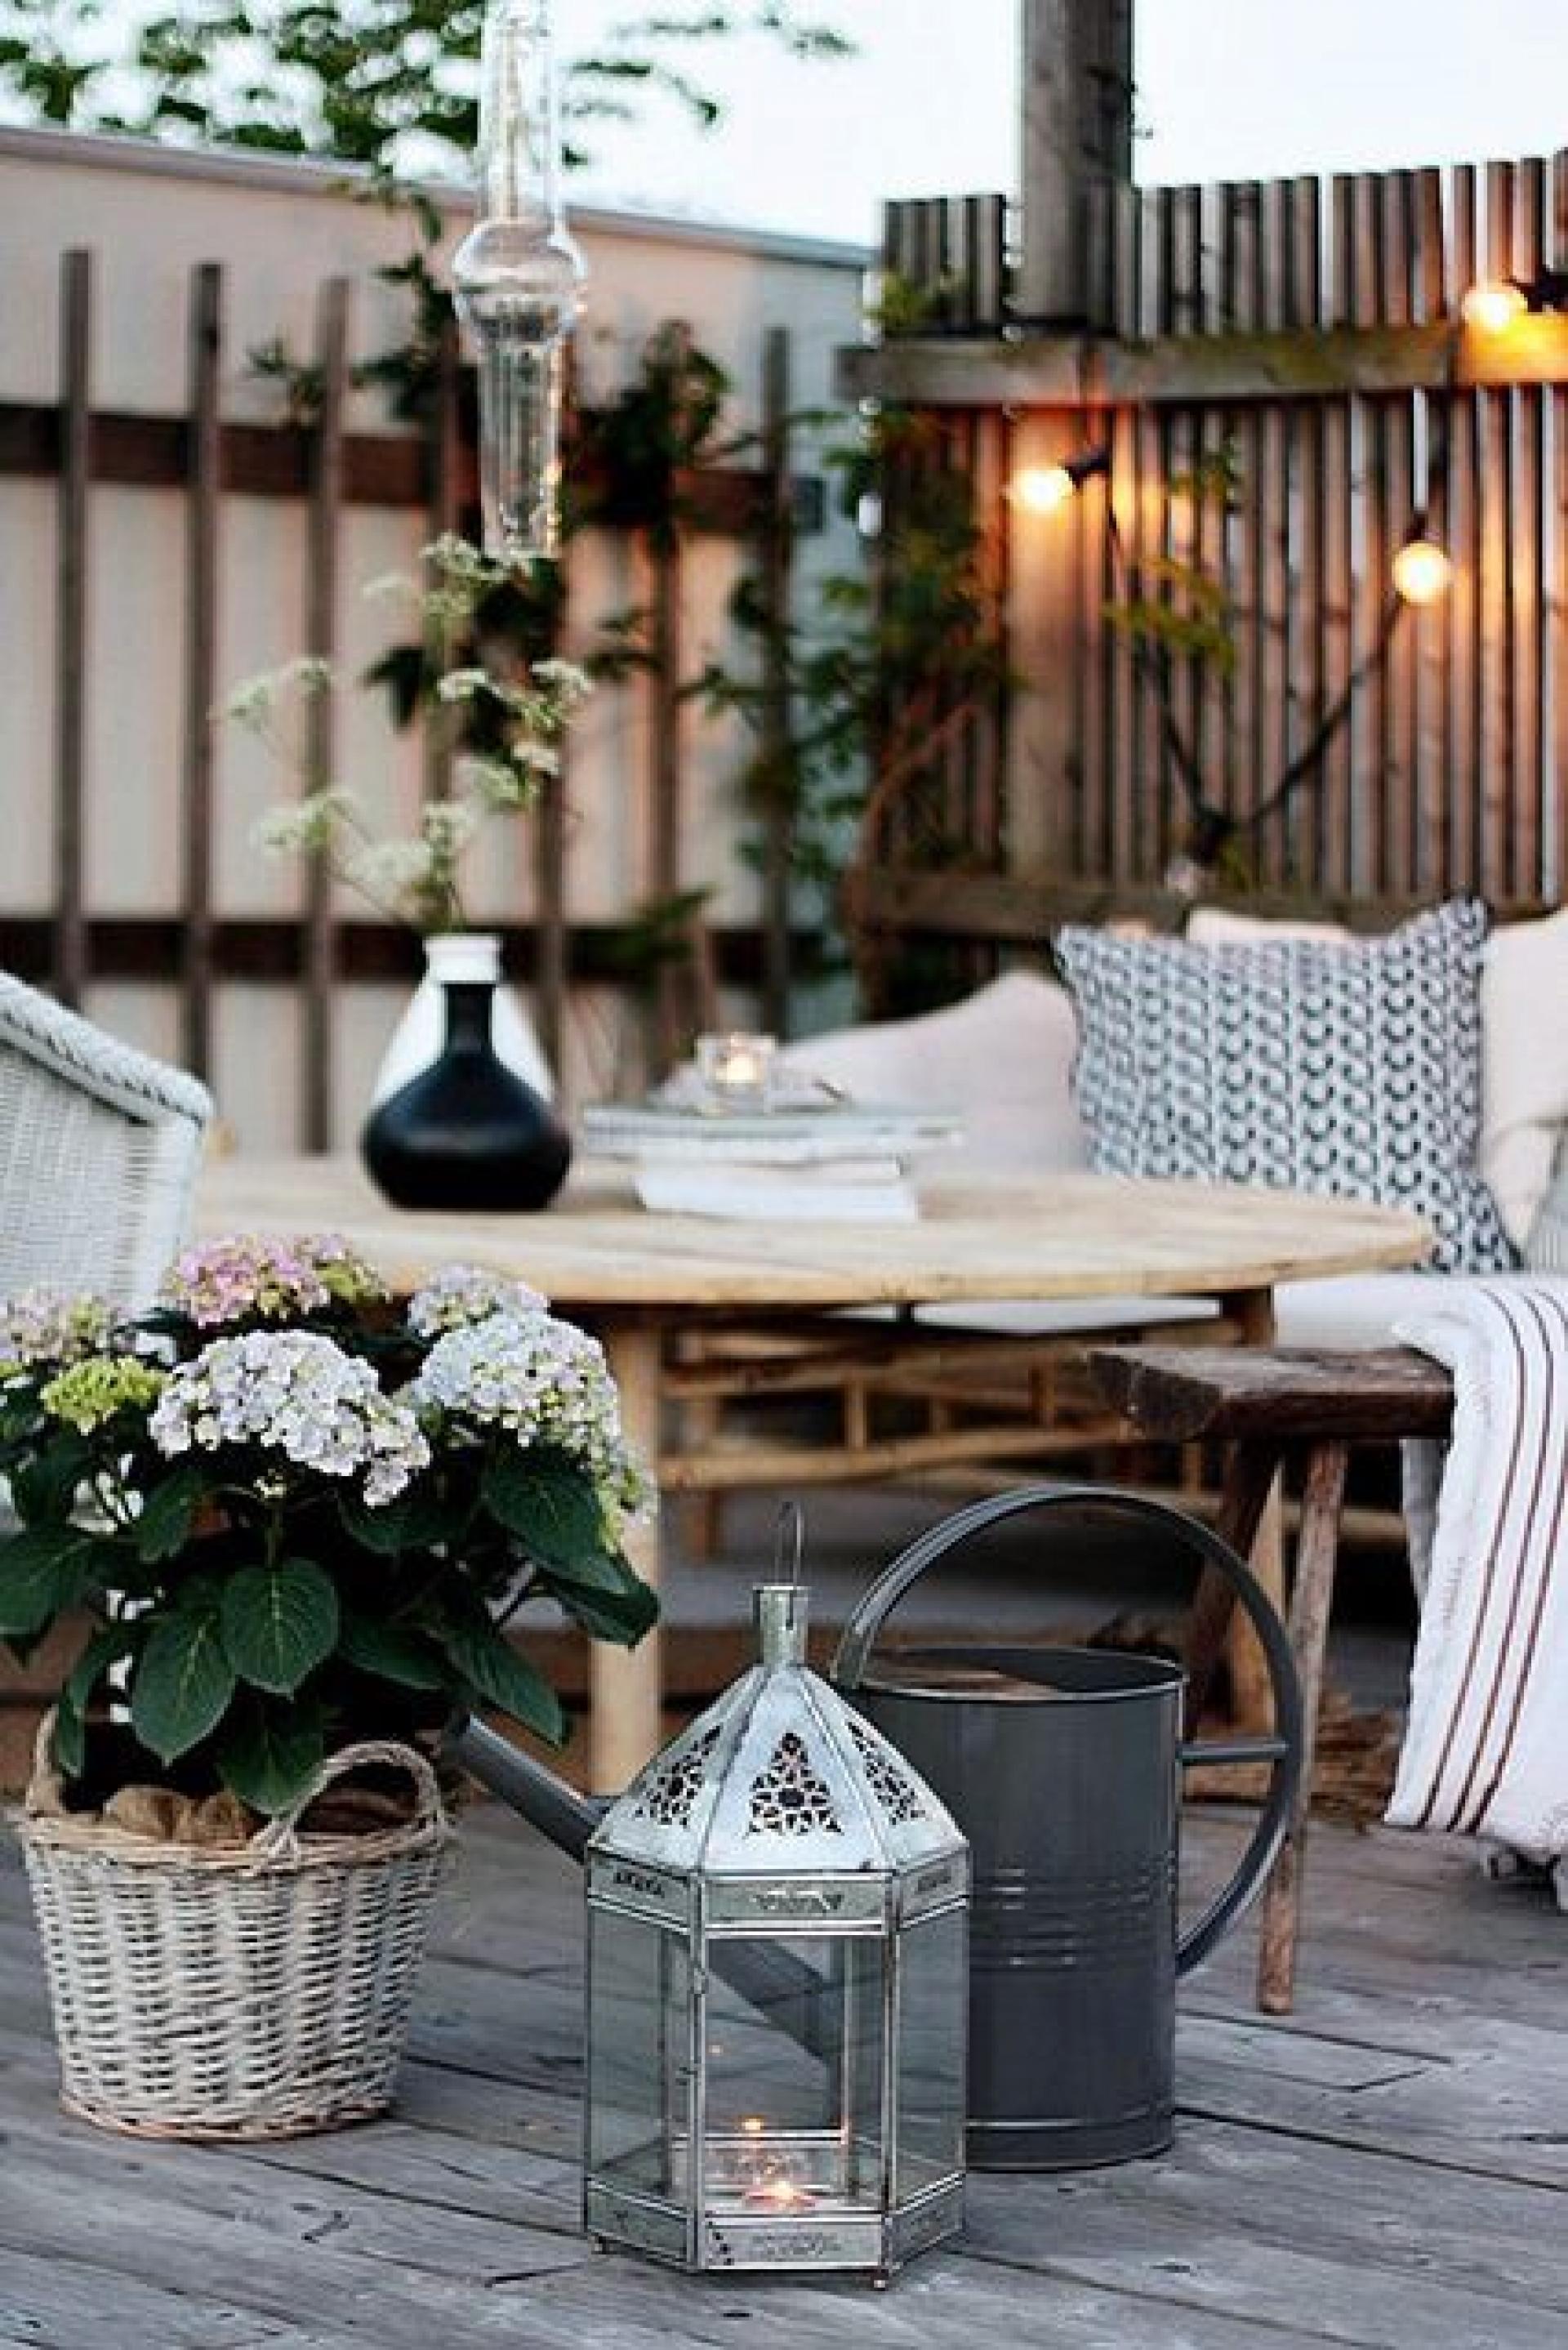 The Secrets Behind a Beautifully Done Vintage Garden Decor 3